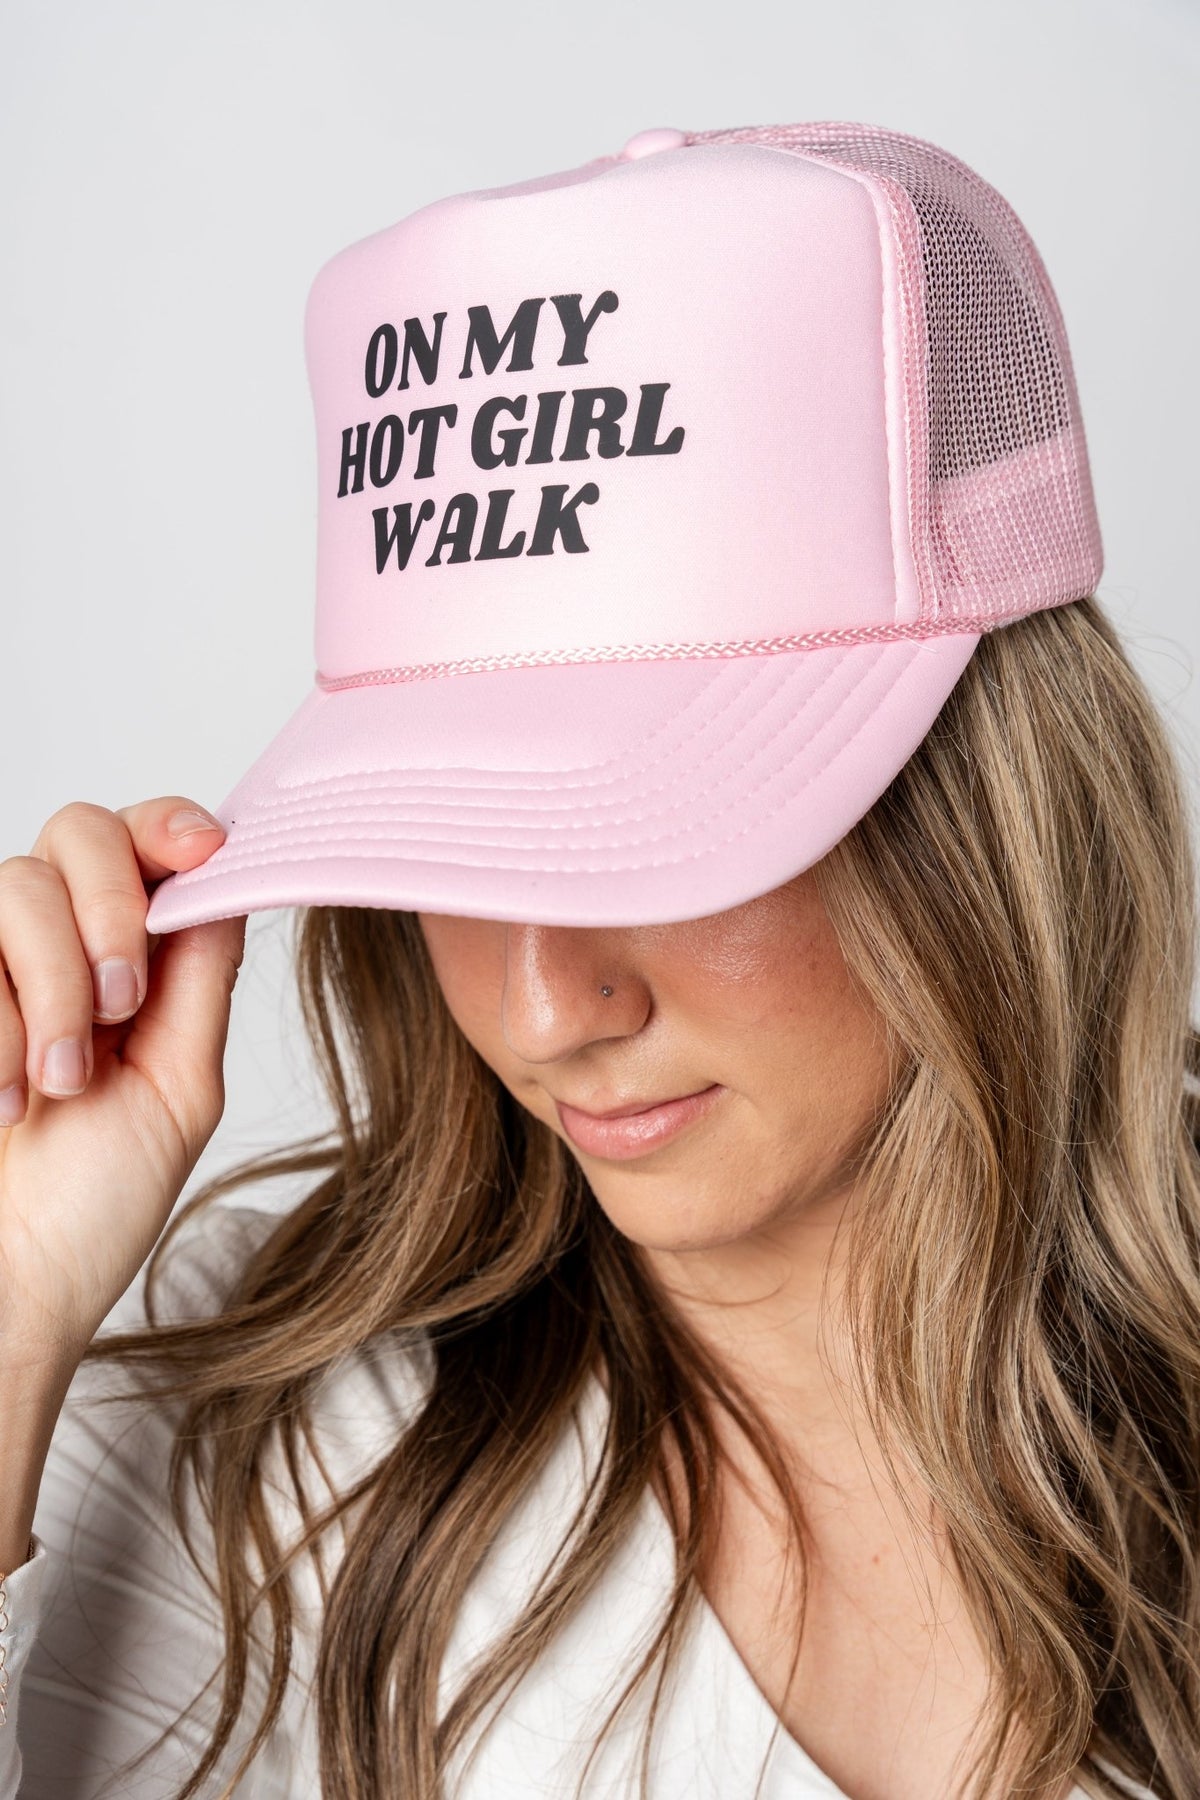 On my hot girl walk trucker hat light pink - Trendy Hats at Lush Fashion Lounge Boutique in Oklahoma City